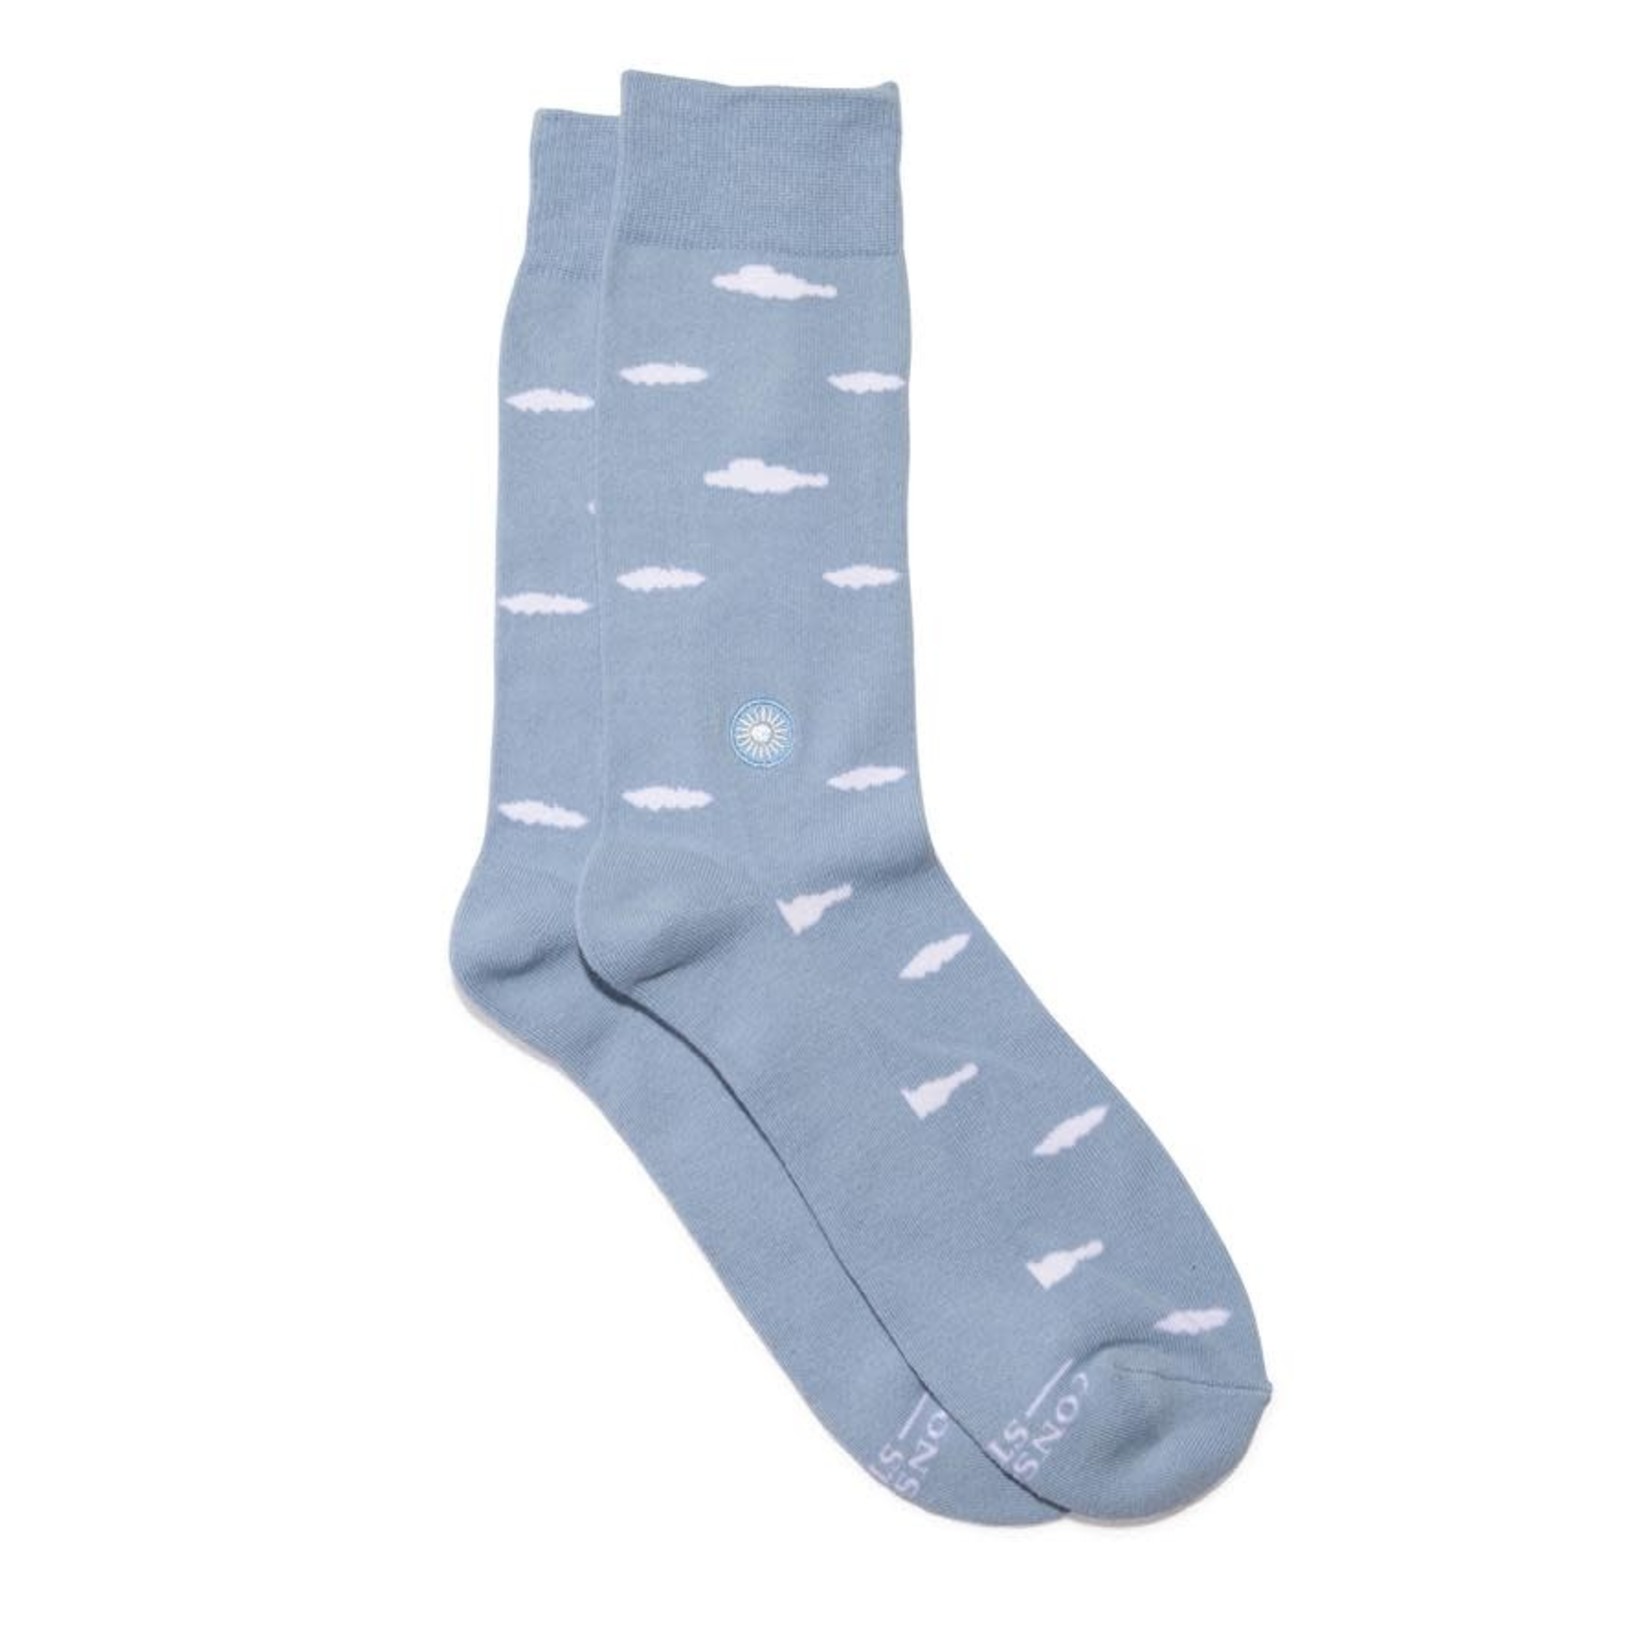 Conscious Step Conscious Step Socks That Support Mental Health, Blue Clouds, Small